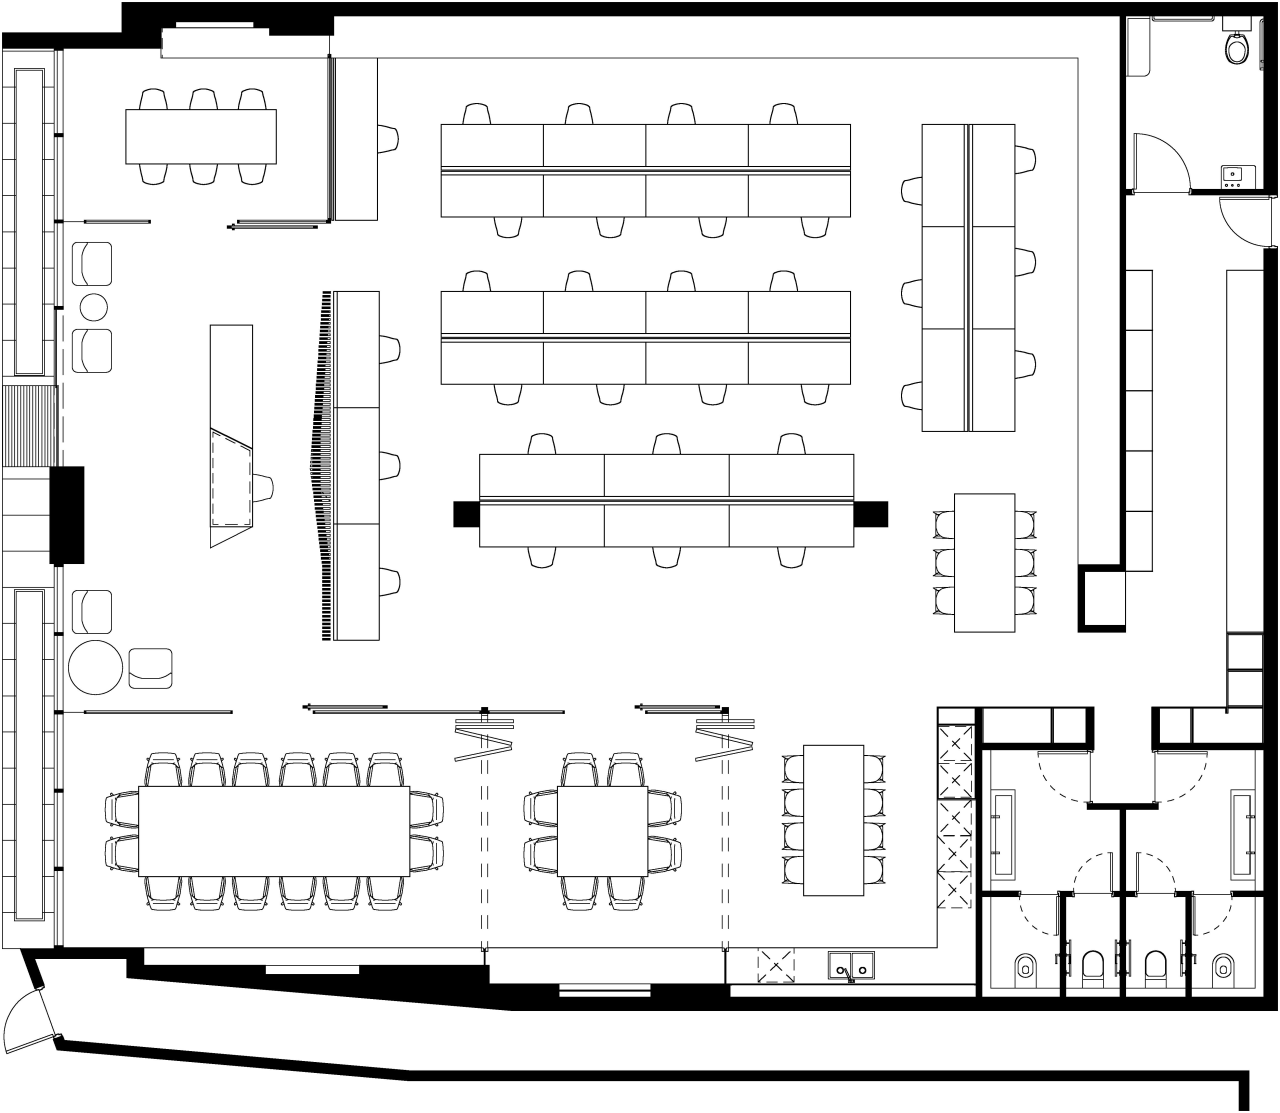 The floorplan of Hillam Architects new premises shows angle, area, black and white, design, diagram, drawing, floor plan, font, line, music, plan, product, product design, structure, technical drawing, text, white